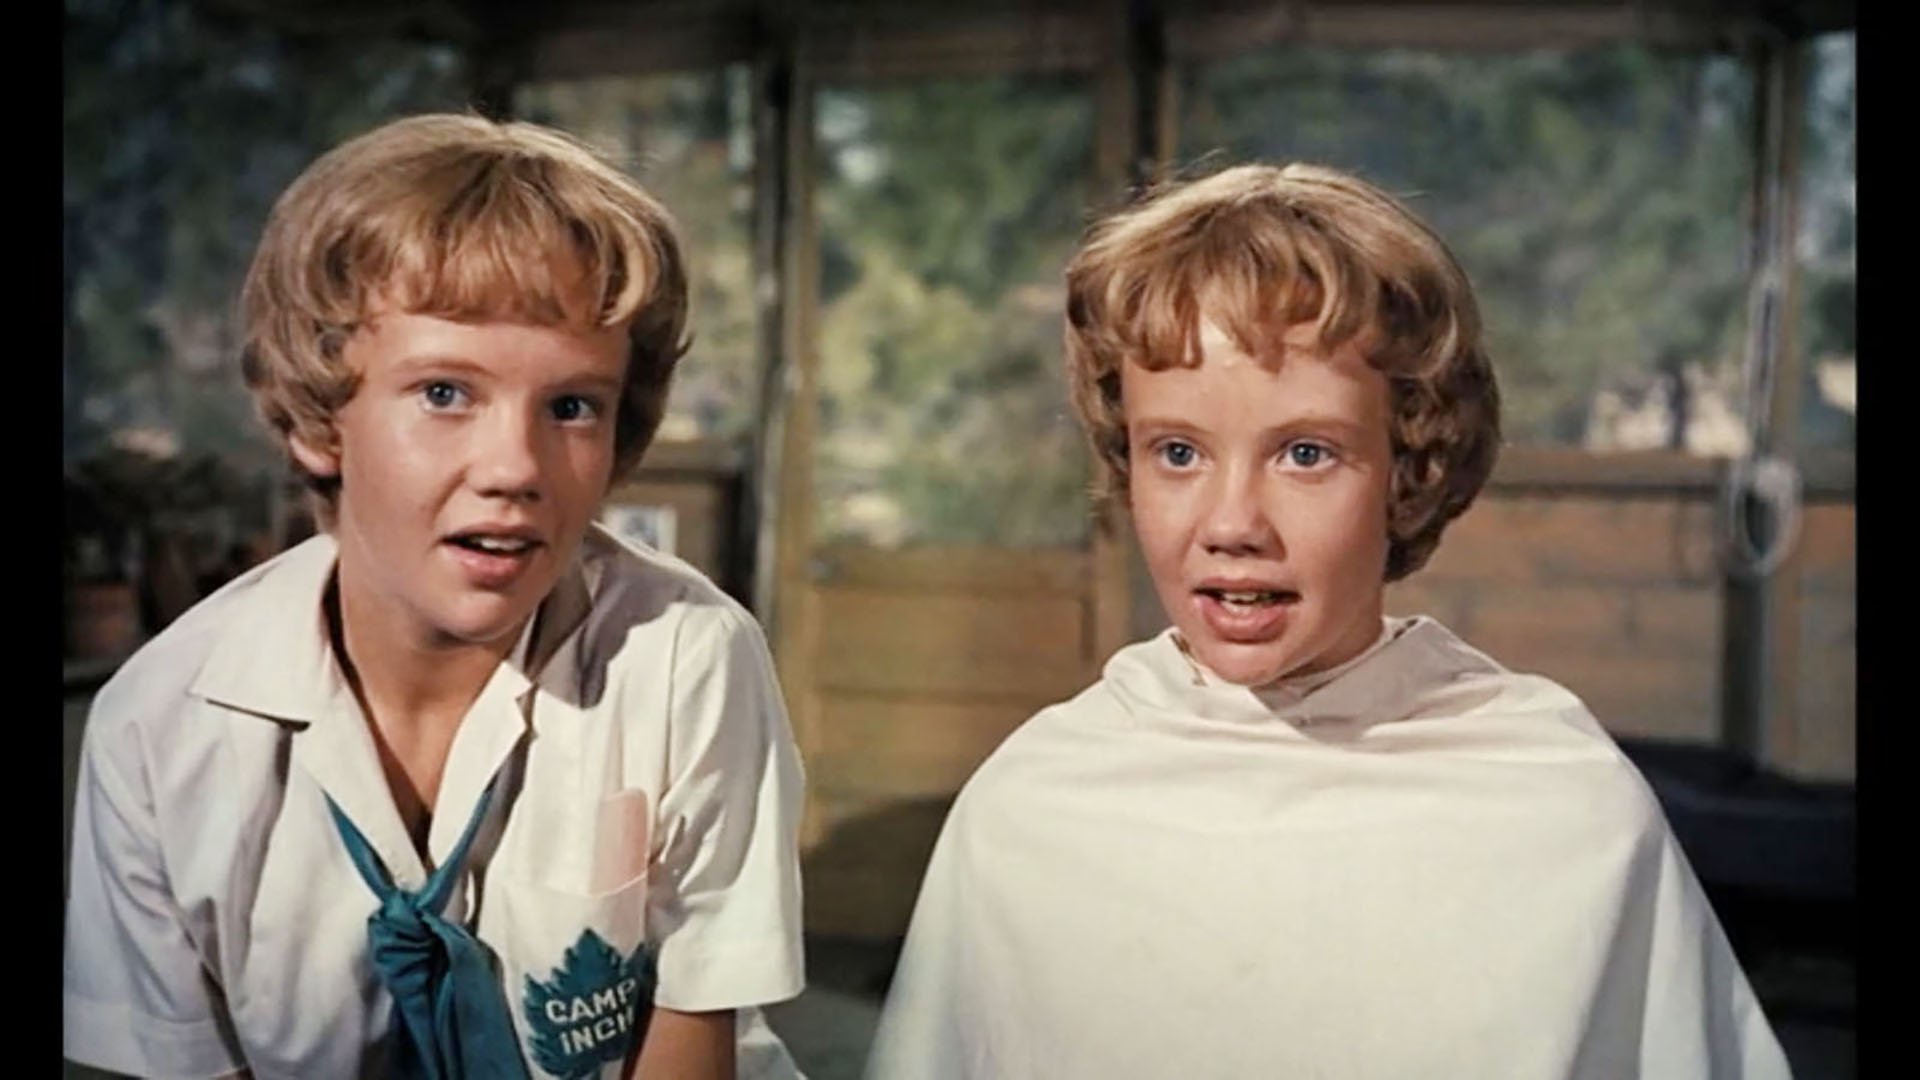 1961 ‘Parent Trap’ free movie at Ken Lindley Field, Sept. 18 The